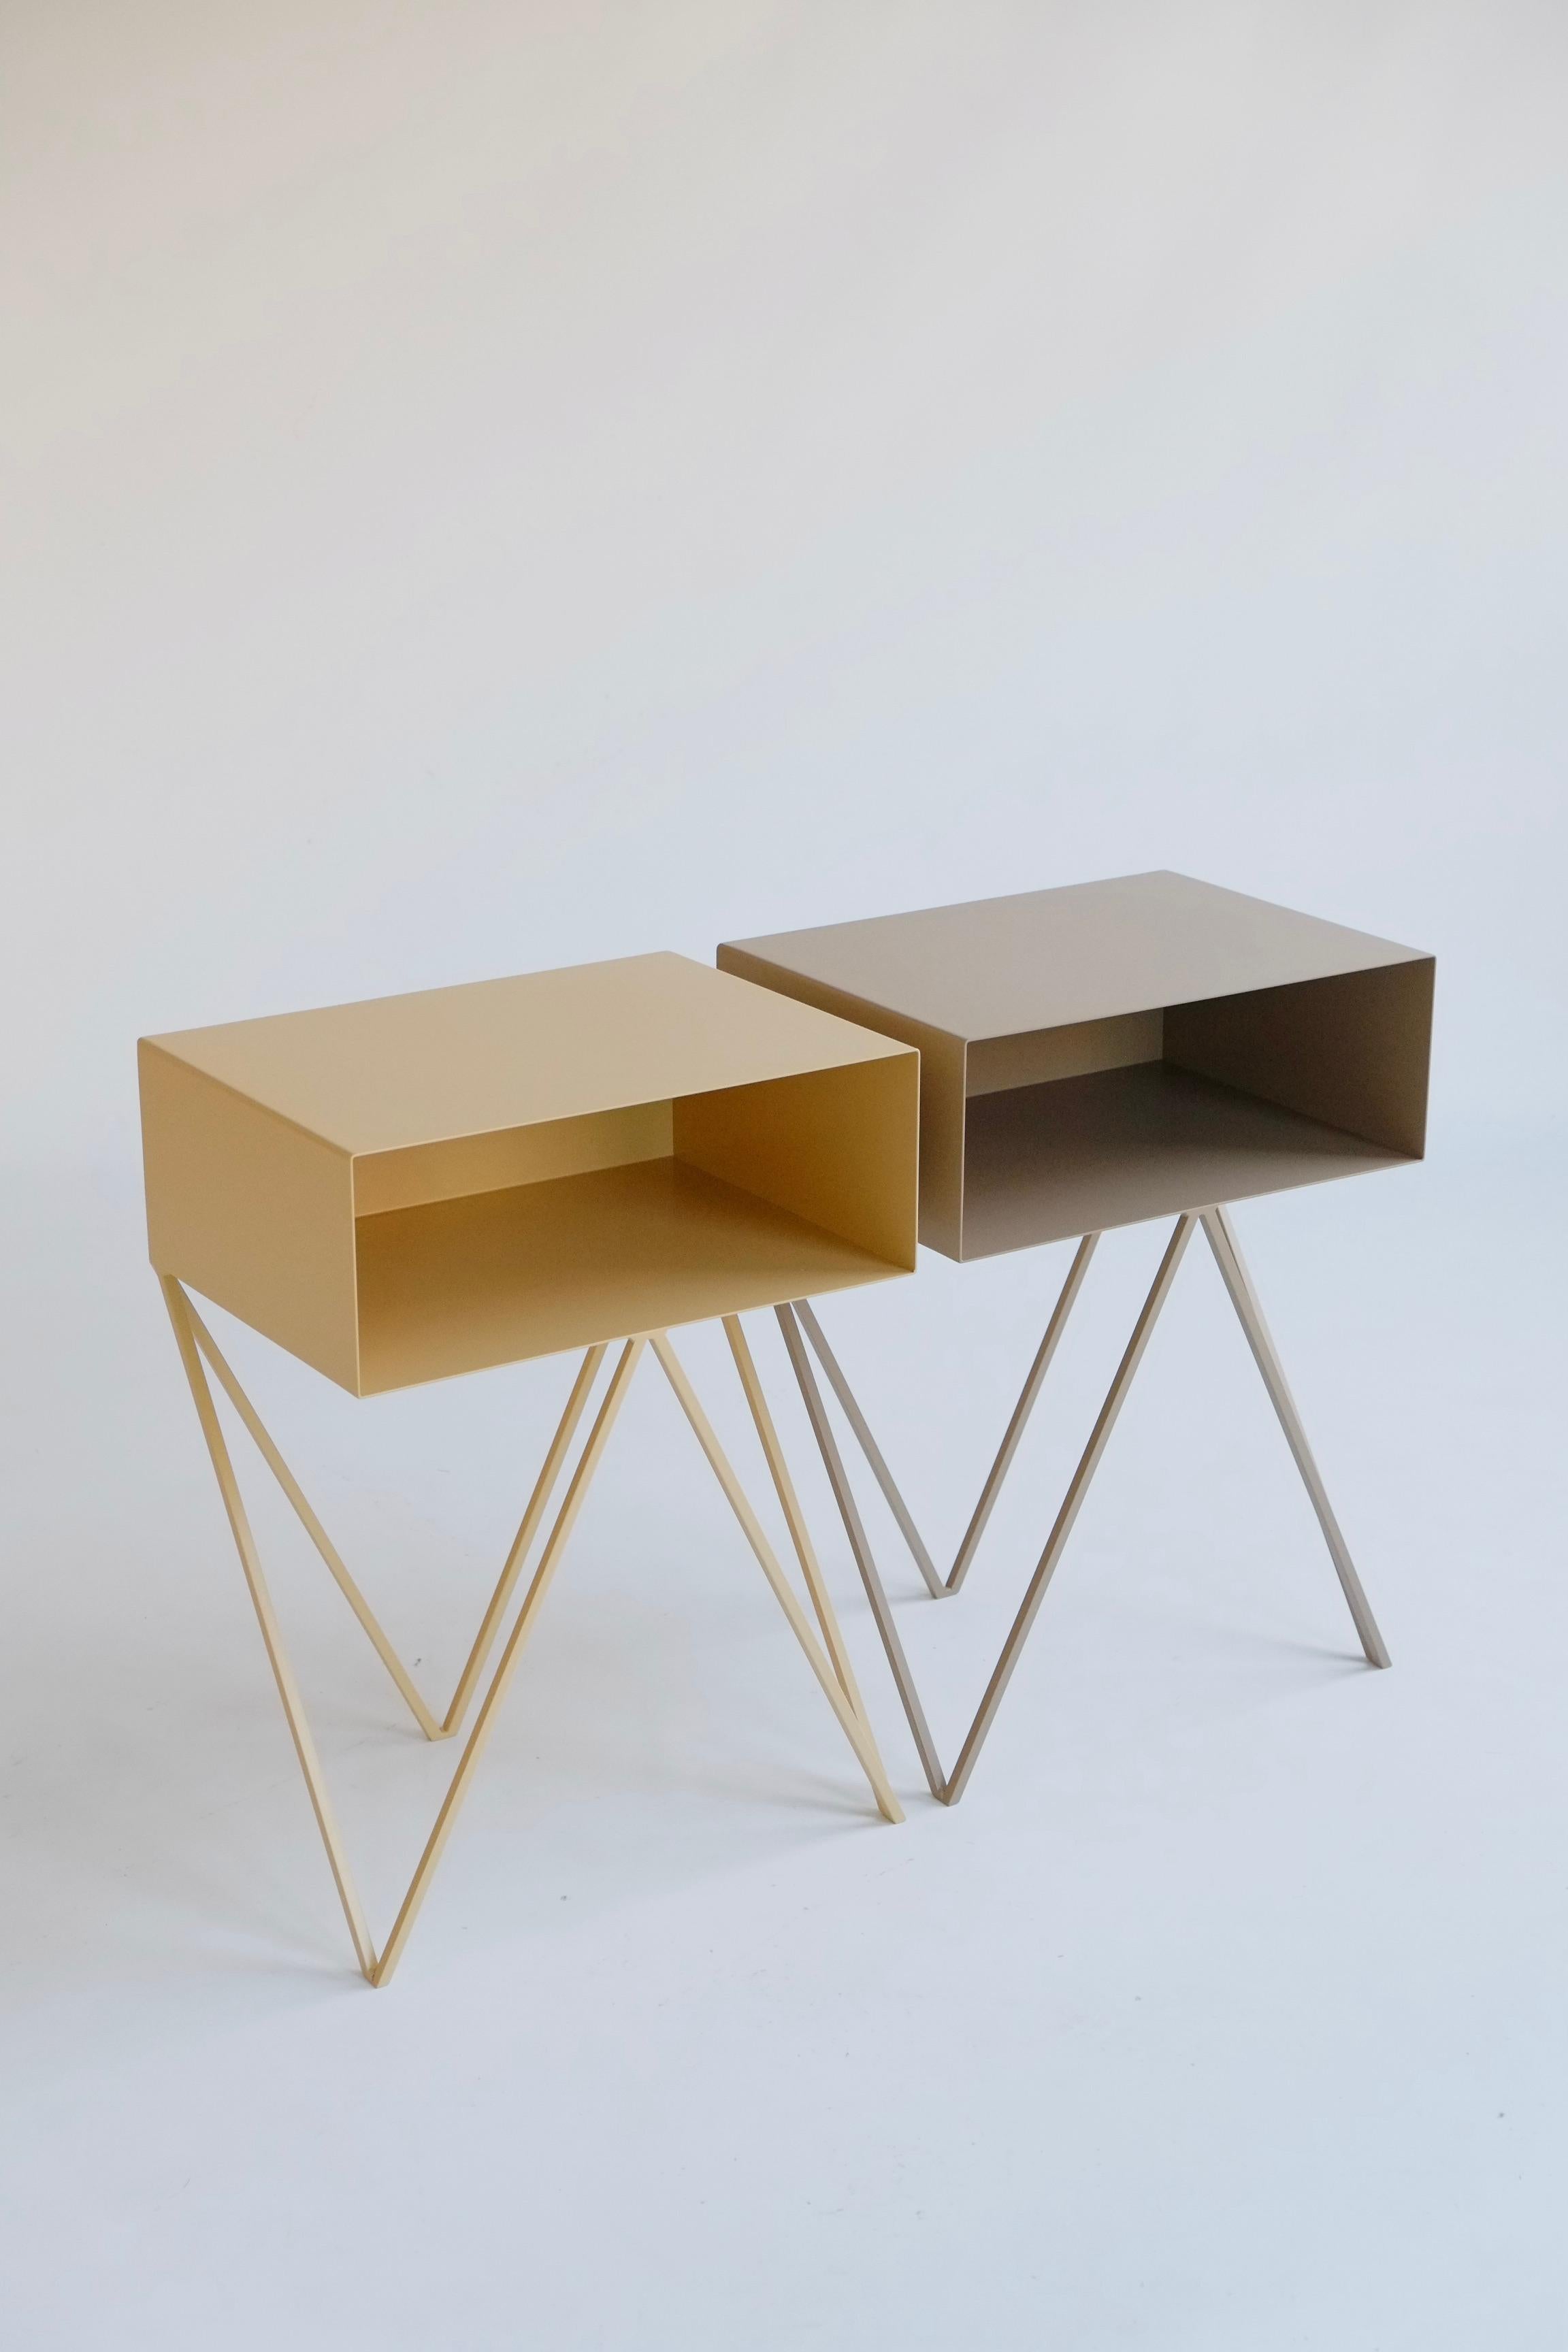 A beautiful pair of mismatched butternut and coco Robot bedside tables. The Robot side table features an open shelf on zig zag legs. A fun and functional design made of solid steel, one is powder-coated in butternut and the other in coco. The clean